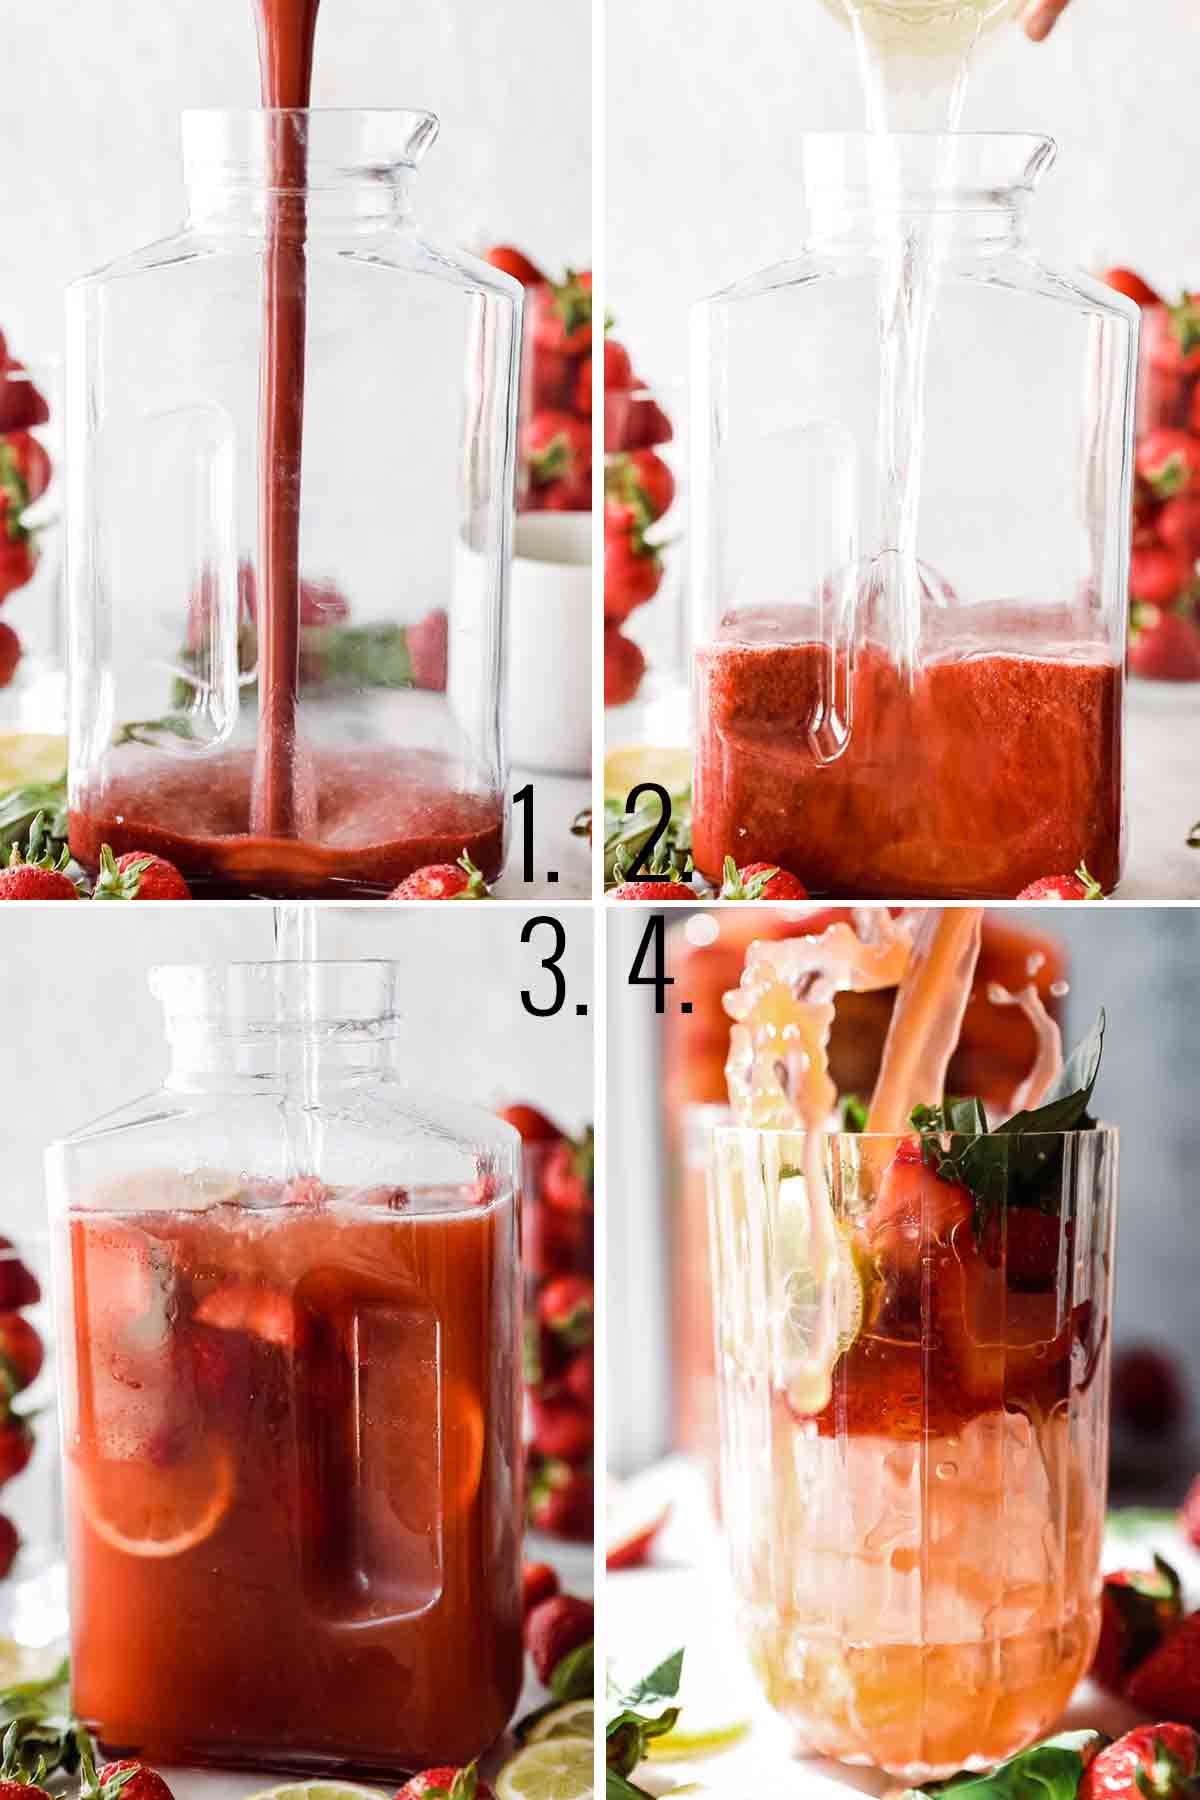 Adding strawberry mixture, simple syrup, lemon juice and water to pitcher.
